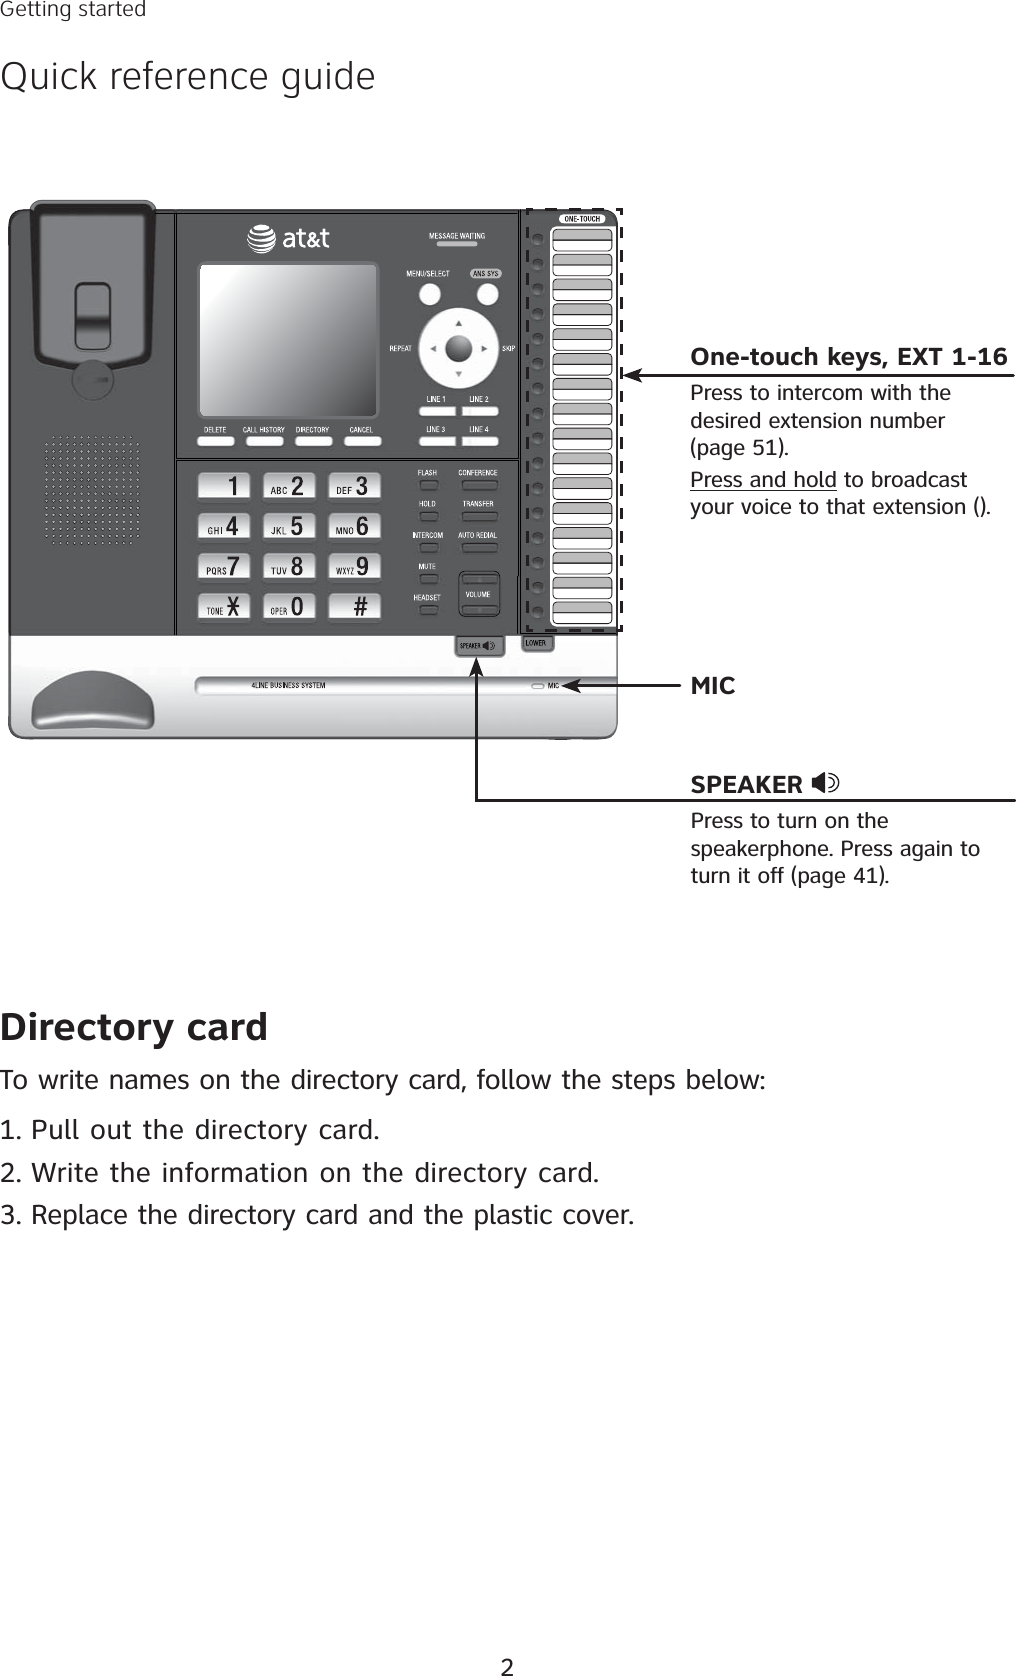 Getting startedQuick reference guide2One-touch keys, EXT 1-16Press to intercom with the desired extension number (page 51).Press and hold to broadcast your voice to that extension (). Directory cardTo write names on the directory card, follow the steps below: Pull out the directory card. Write the information on the directory card.Replace the directory card and the plastic cover. 1.2.3.SPEAKERPress to turn on the speakerphone. Press again to turn it off (page 41).MIC